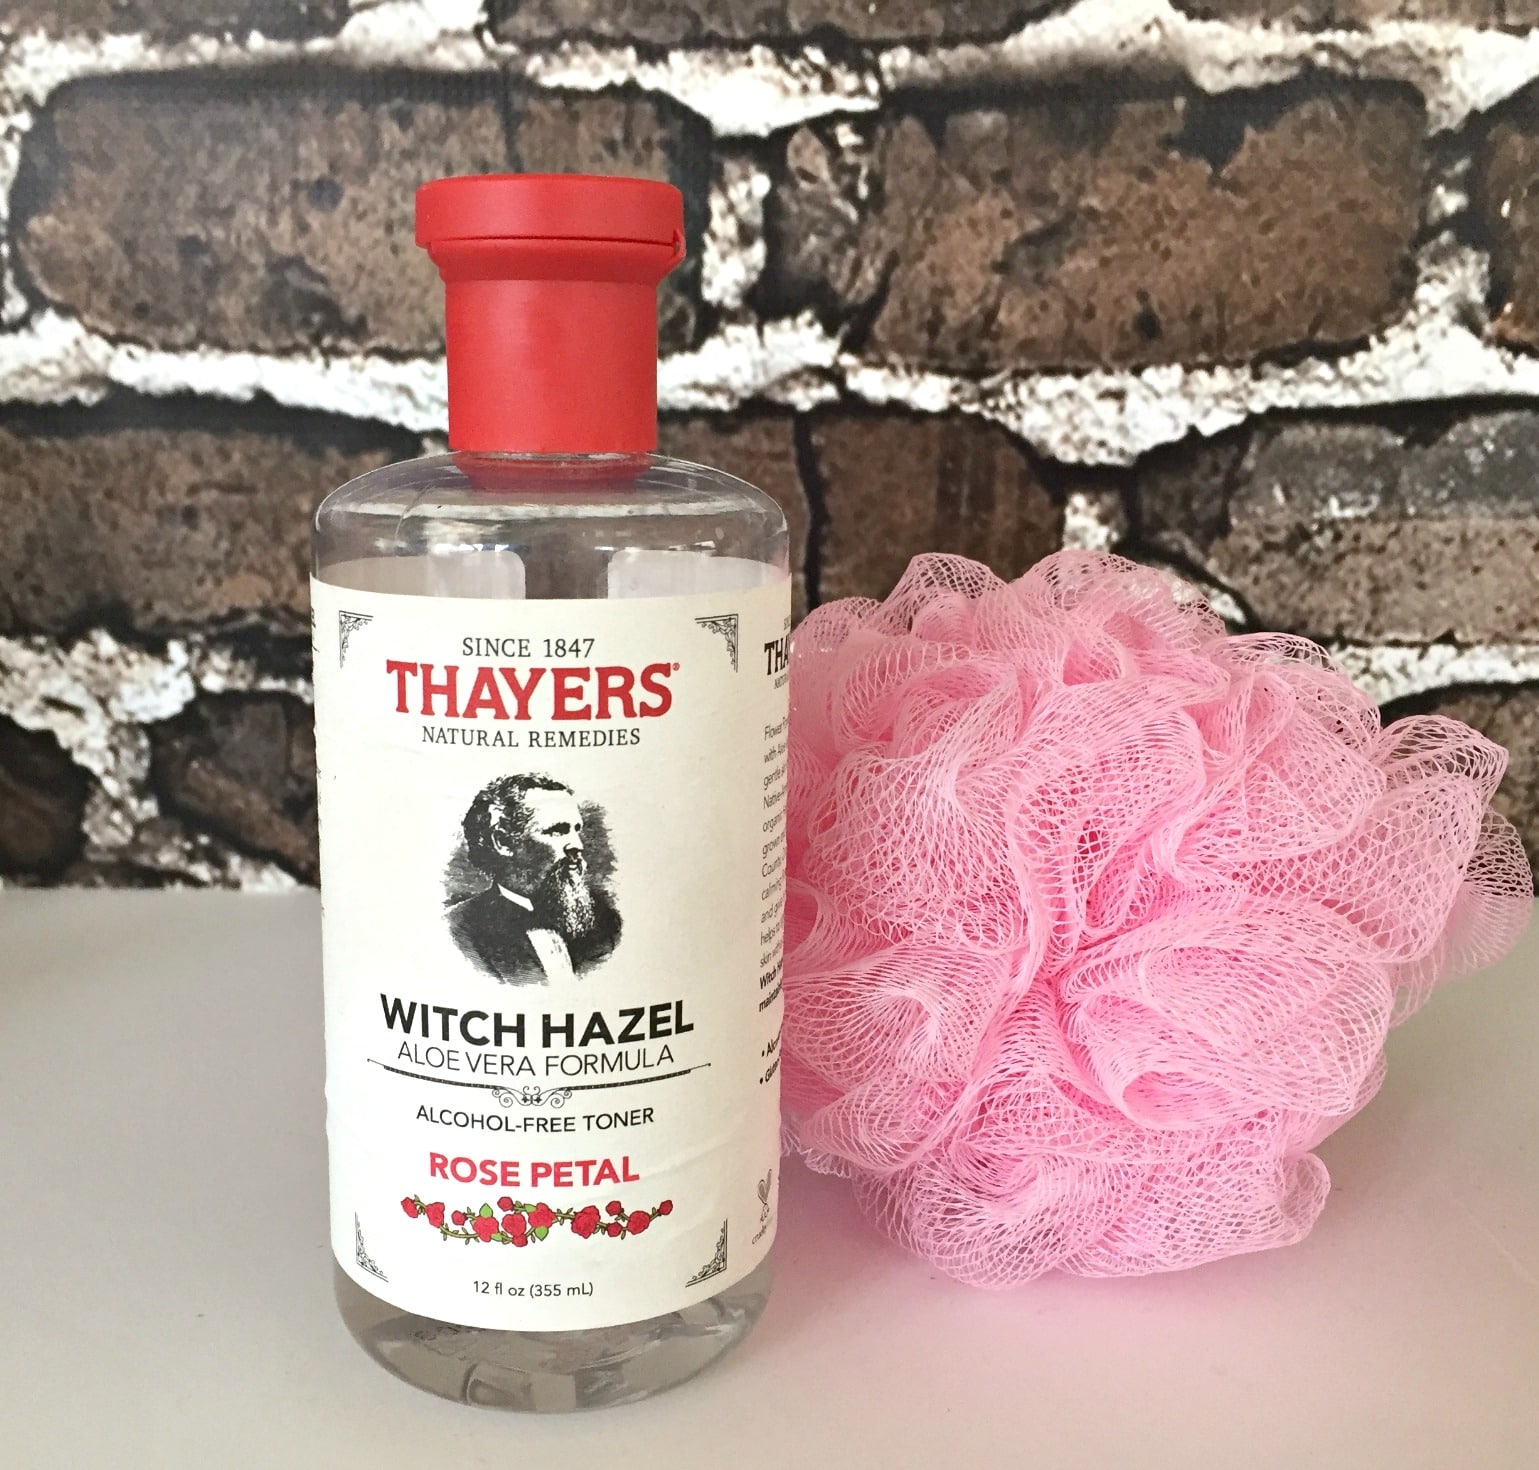 A few of my favorite things from Amazon Thayers witch hazel rose petal face toner